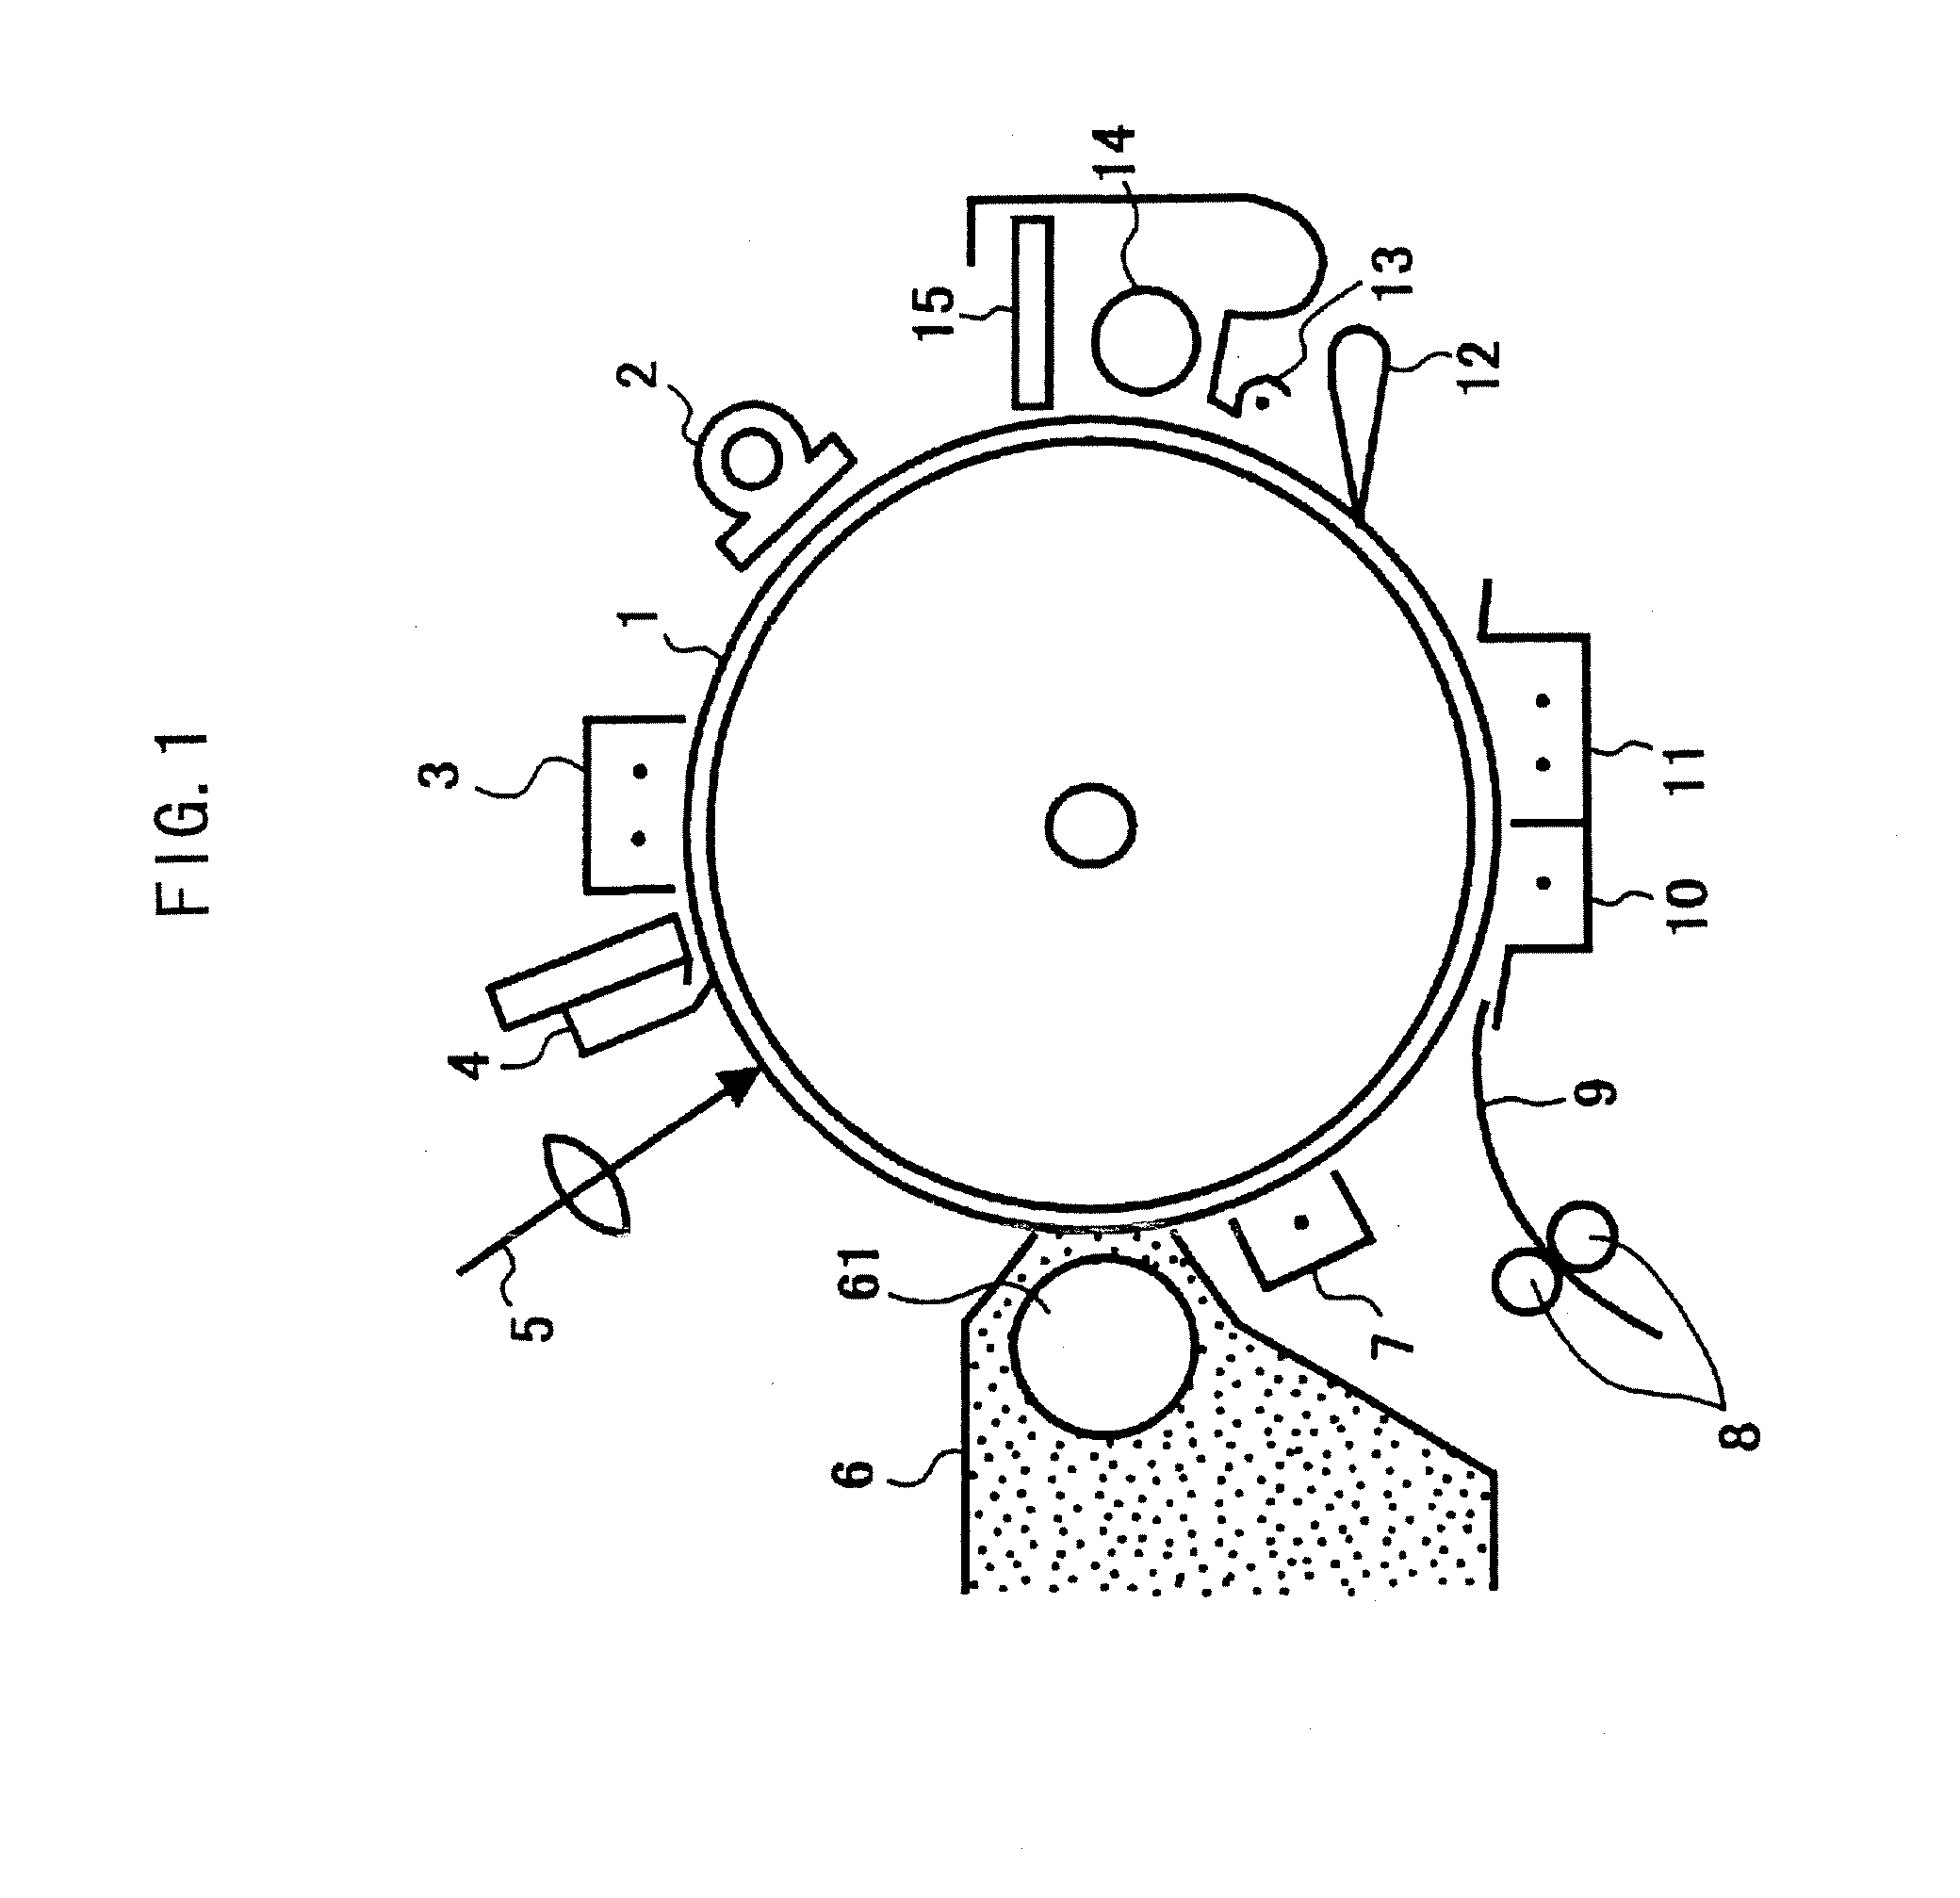 Electrophotographic photoconductor and method of preparing same